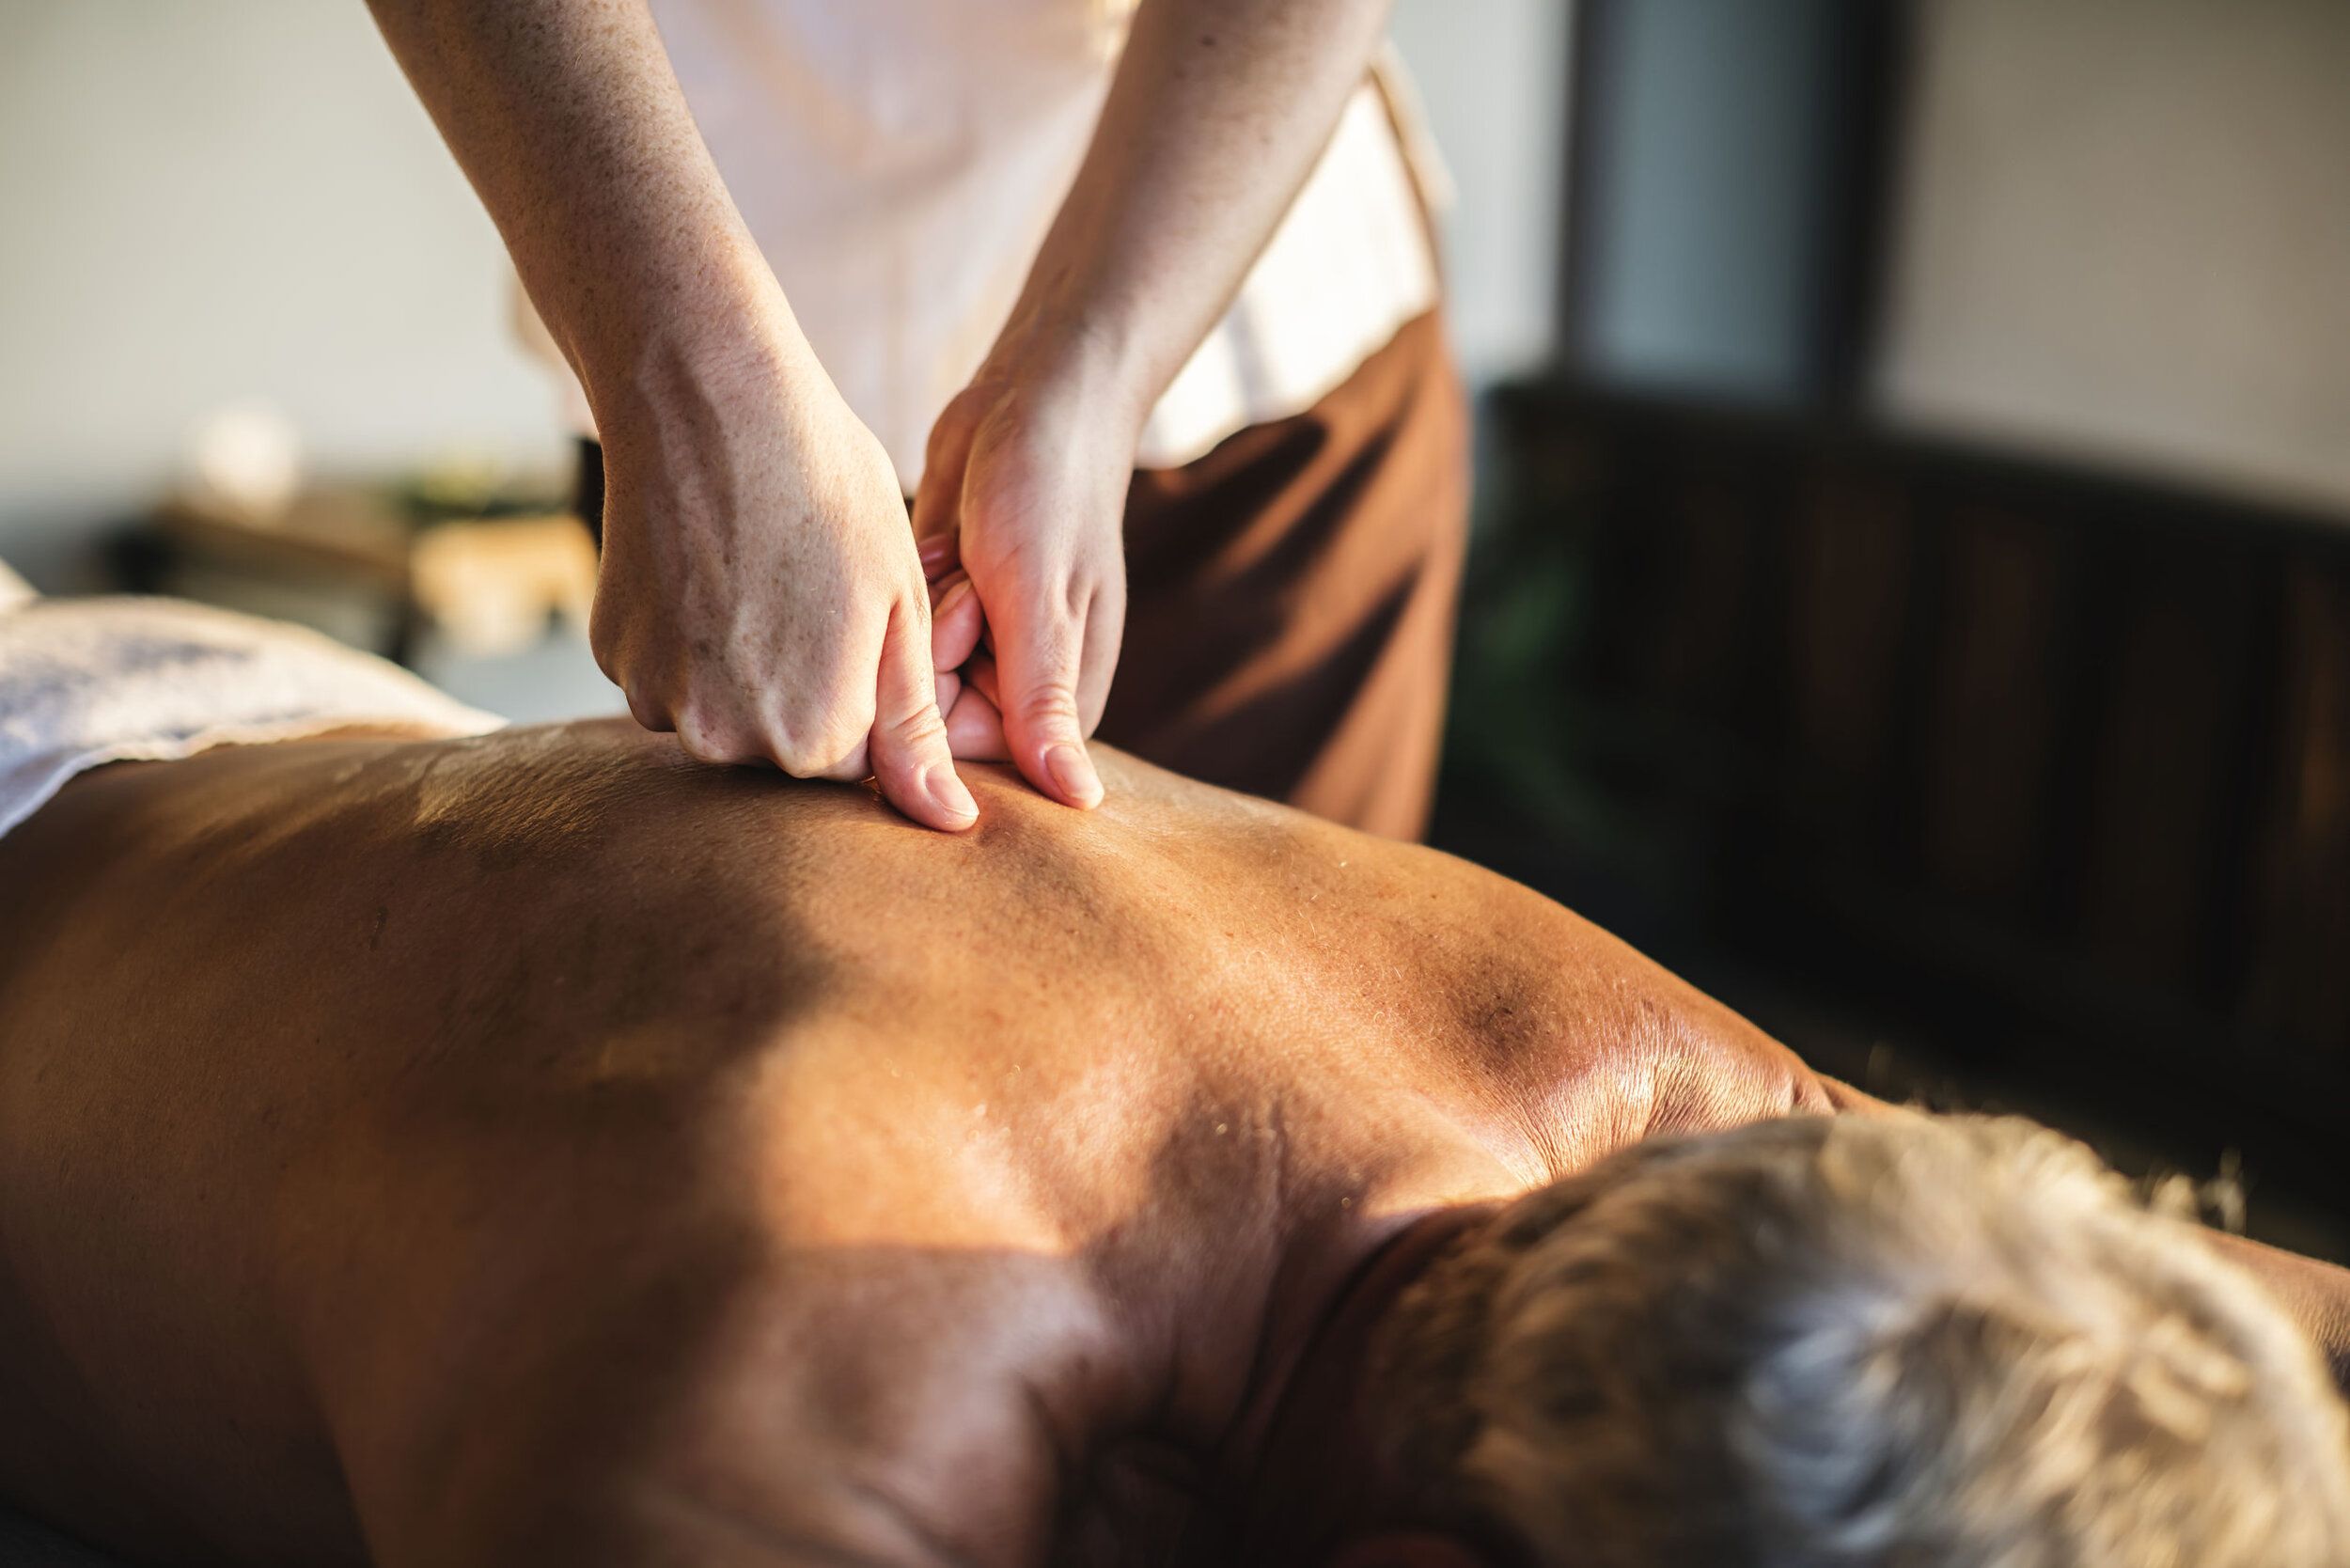 Therapeutic Massage incorporates a variety of advanced modalities, includin...